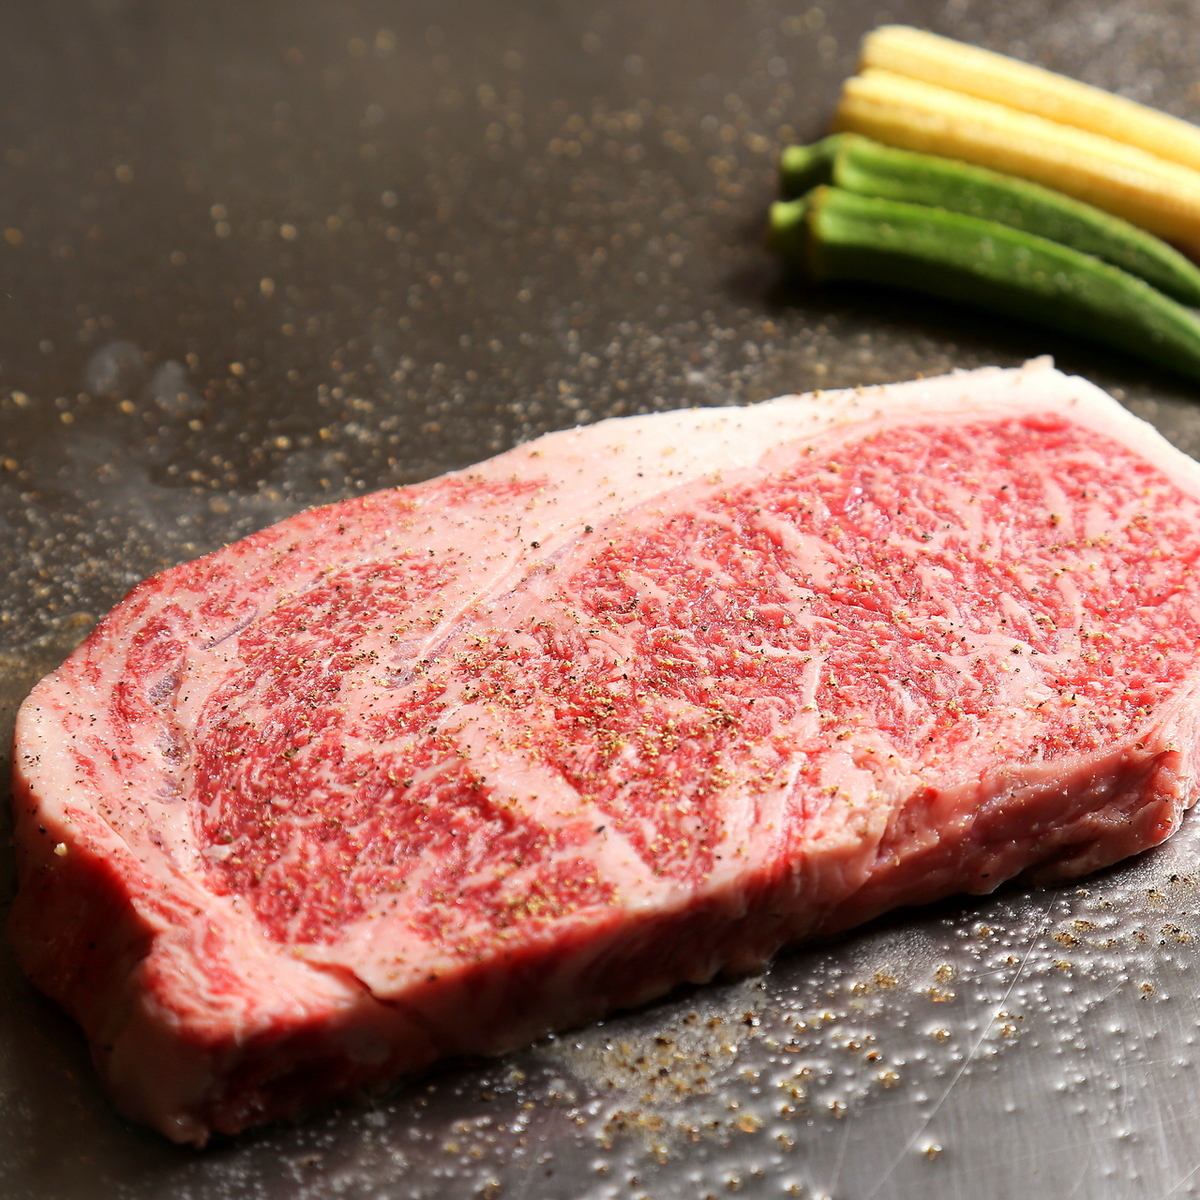 All of the meat prepared at Aohige is carefully selected Hiroshima A4 Wagyu beef.